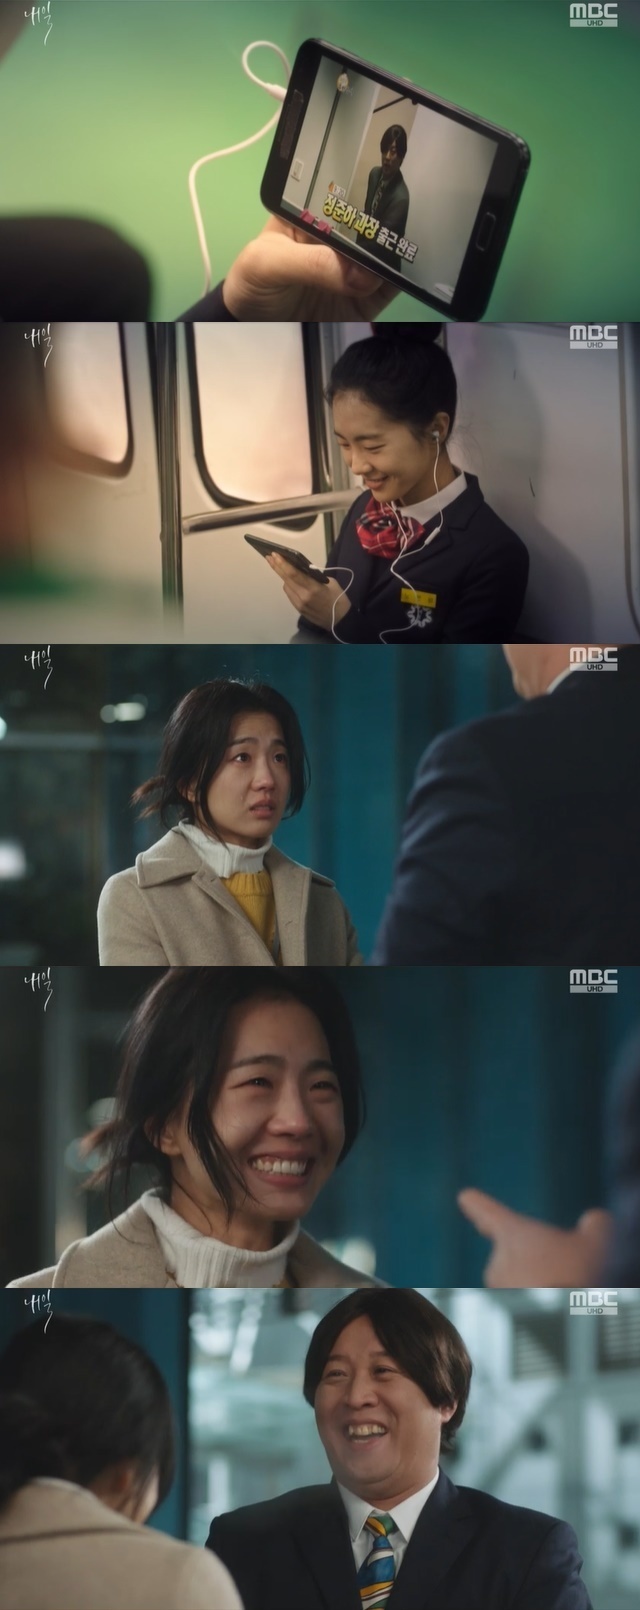 Jin-Jun-ha, who was divided into chiefs for a special appearance, gave a hearty impression to viewers.In the second episode of MBCs tomorrow (playplayplay by Park Ran, Park Ja Kyung, Kim Yoo Jin / Director Kim Tae Yoon, and Sung Chi Wook), which was broadcast on April 2, No Eun-Bi (Jo In-min) who decides to die due to Kim Hye-won (Kim Chae-eun), a school violence perpetrator who was reunited in society, and Kim Hee-sun, Choi, who struggles to prevent it The figure of Jun-woong (Lord) was drawn.On this day, through the key of Memory, Choi Jun-woong, who entered the past Memory of No-Bi, captured the terrible evil of Kim Hye-won and No-Bi.Kim Hye-won, a webtoon writer who became famous for drawing cartoons related to school violence, was actually the main driver of the school violence that bullied No.When he returned to reality after seeing the wound of No-Bi, he tried to reach out to No-Bi somehow.But the trauma of NoEun-Bi was already stimulated.Kim Hye-won, who made a memory of No-Bi through his friends who were not able to remember No-Bi and were a helper of the school, treated No-Bi with a shameless attitude.When Kim was alone, he still threatened No. Eun-Bi, and the program crew pretended that the problem with No. Eun-Bi was a light problem.NoEun-Bi tried to inform the production team about Kim Hye-won, but was ignored.The production team of this course said that I should give No-Bi a little trouble during my school days and interfere with my work. Think about why it happened.I didnt want to get tired at the time, and the teacher who turned away from the harassment of No.Eventually, No-Bi abandoned hope for life and climbed onto the roof of the station. Choi caught her, but it was useless.There was a taunt before this No-Bi, and the taunt said, If death felt like an answer, it dies, its tough, its bullies.You are a mass of people. The old-fashioned vitriol succeeded in bringing out the heart of No. Eun-Bi, who said, So what do you do to me, say that you know what you do.I struggled to get out of it, and I was hurt by laughing, and I tried to laugh again, and I dont know how I did it.Soon after, No-Bi actually confessed that he wanted to live, and the training immediately revealed that he was Those Merry Souls, saving people, and was surprised to save No-Bi from the rooftop.The old man asked No. Eun-Bi how he felt about falling apart. What did you do wrong. They did wrong? Avoiding misfortune makes you happy?If you do not save yourself, there is no salvation. So do not let anyone dare to treat you. This made No-Bi seem to have given up its immediate extreme choice, but the Melencolia I figures in Redlight still hit 50 percent.It was impossible to tell whether preventing the death of No-Bi was a success or a failure.At this time, in front of No Eun-Bi, there was a Jeong Jun-ha who was the only one who laughed at the time when he could not laugh.Jeong Jun-ha, who seemed to have been brought to Choi Jun-woong, spoke to No Eun-Bi in a political tone, and when the crying No Eun-Bi laughed, I laughed, I laughed, I was a fan.I did, she said, purely delighted.After the chief of staff who succeeded in making NoEun-Bi laugh, Choi Jun-woong hugged NoEun-Bi warmly. Listen, you laugh like that. Thank you.I did not give up. No-Bis Melencolia I figure was down to 20% and showed stable figures.